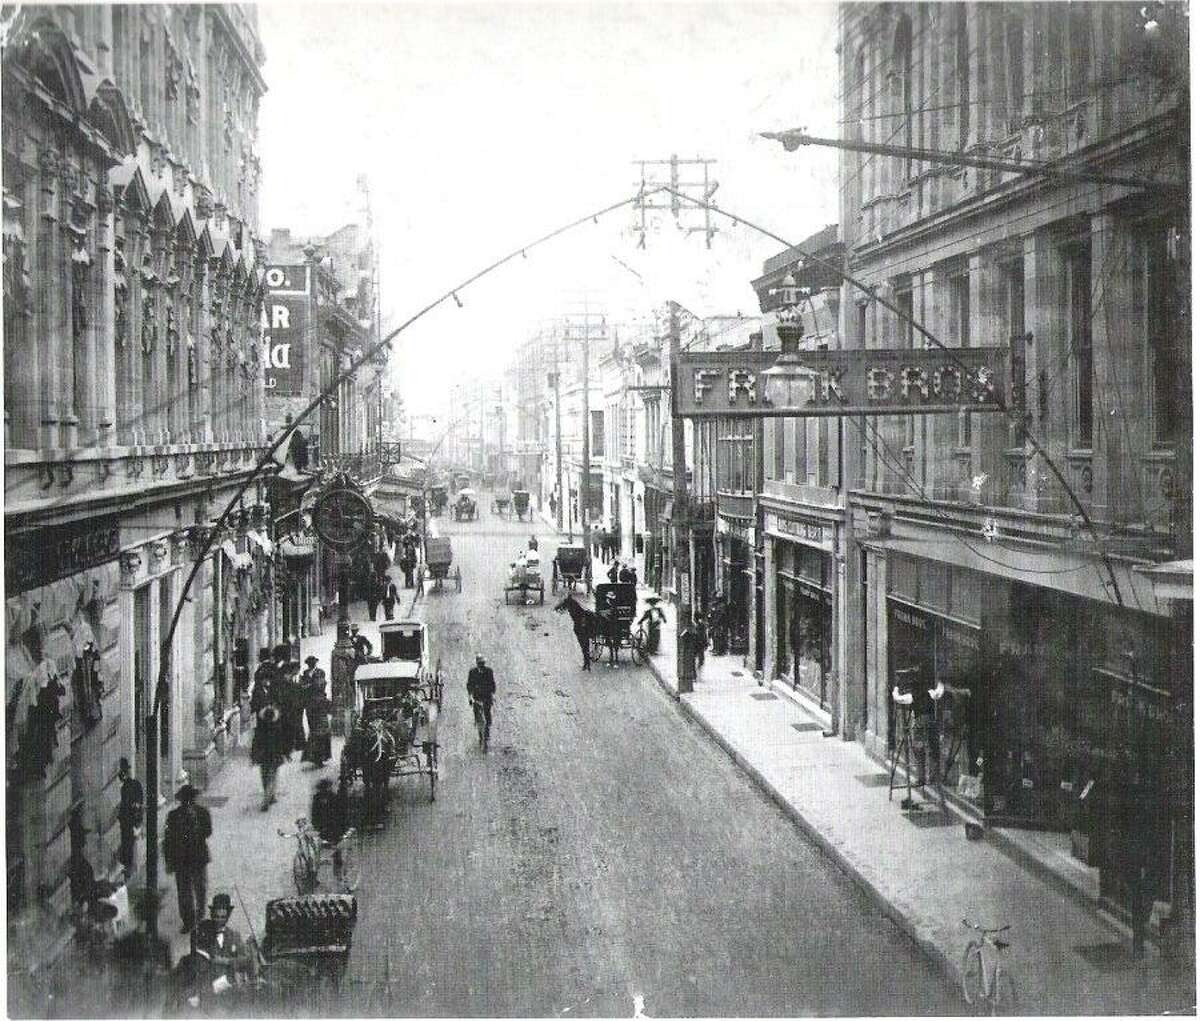 Buggies are parked and moving along Commerce Street in downtown San Antonio in 1900.